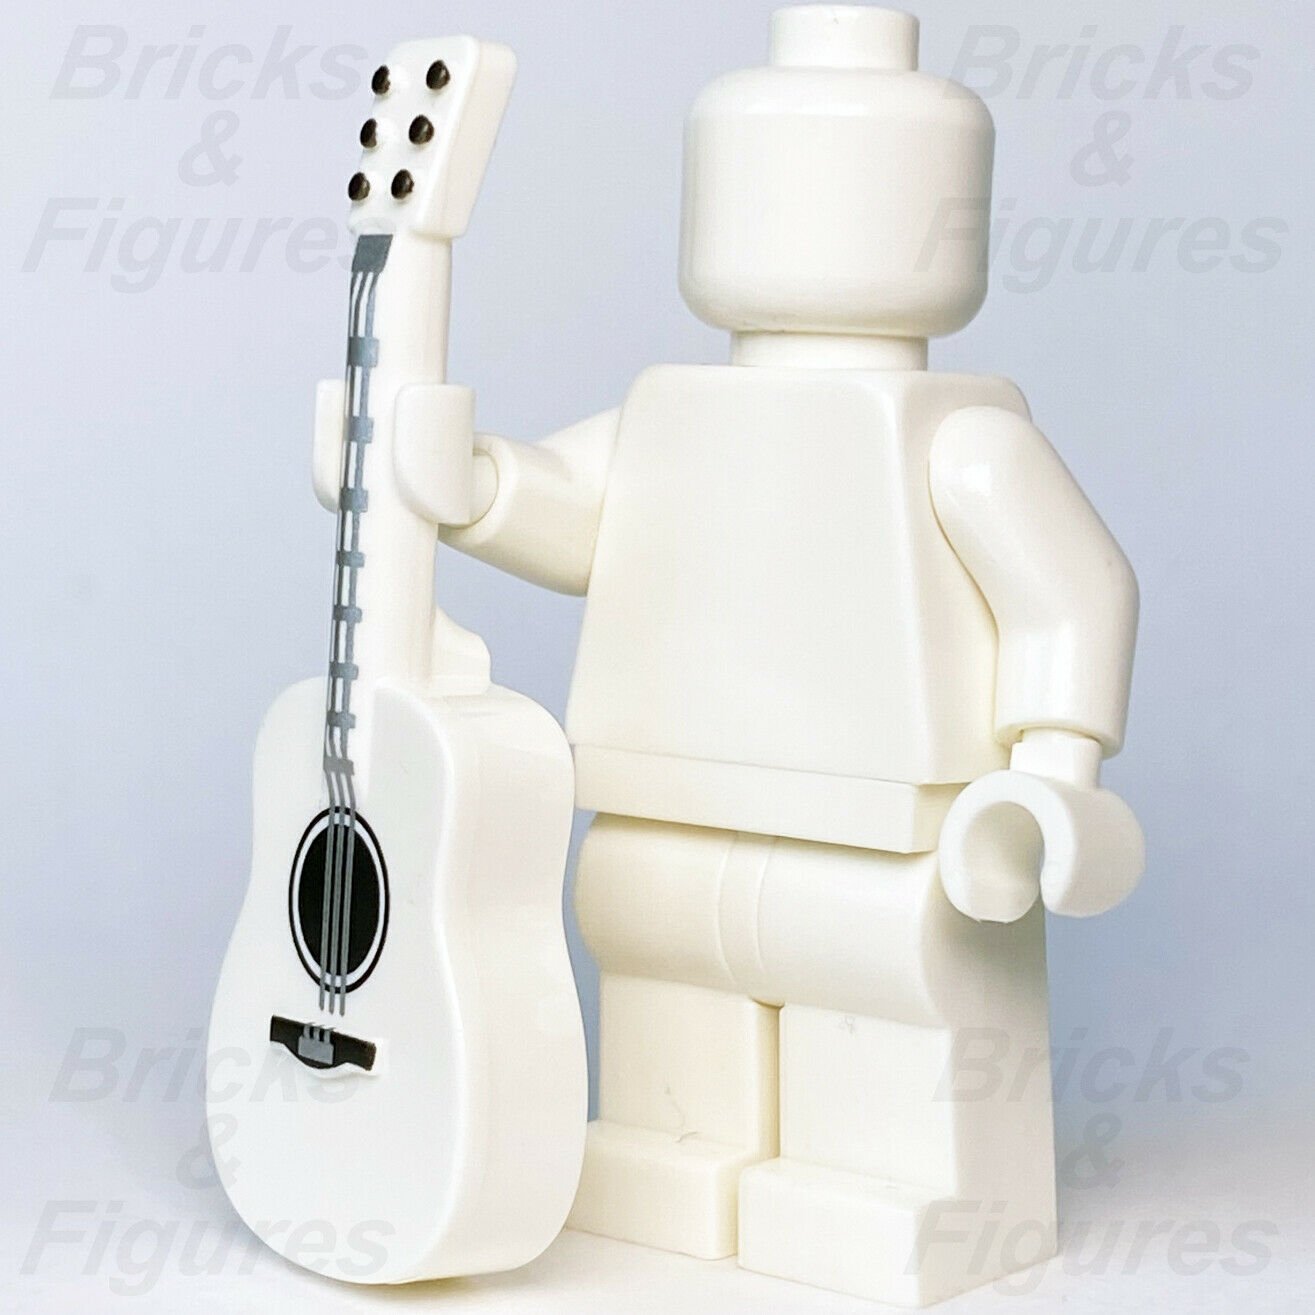 New Ninjago LEGO White Acoustic Guitar with Silver Strings Part 71735 21317 - Bricks & Figures